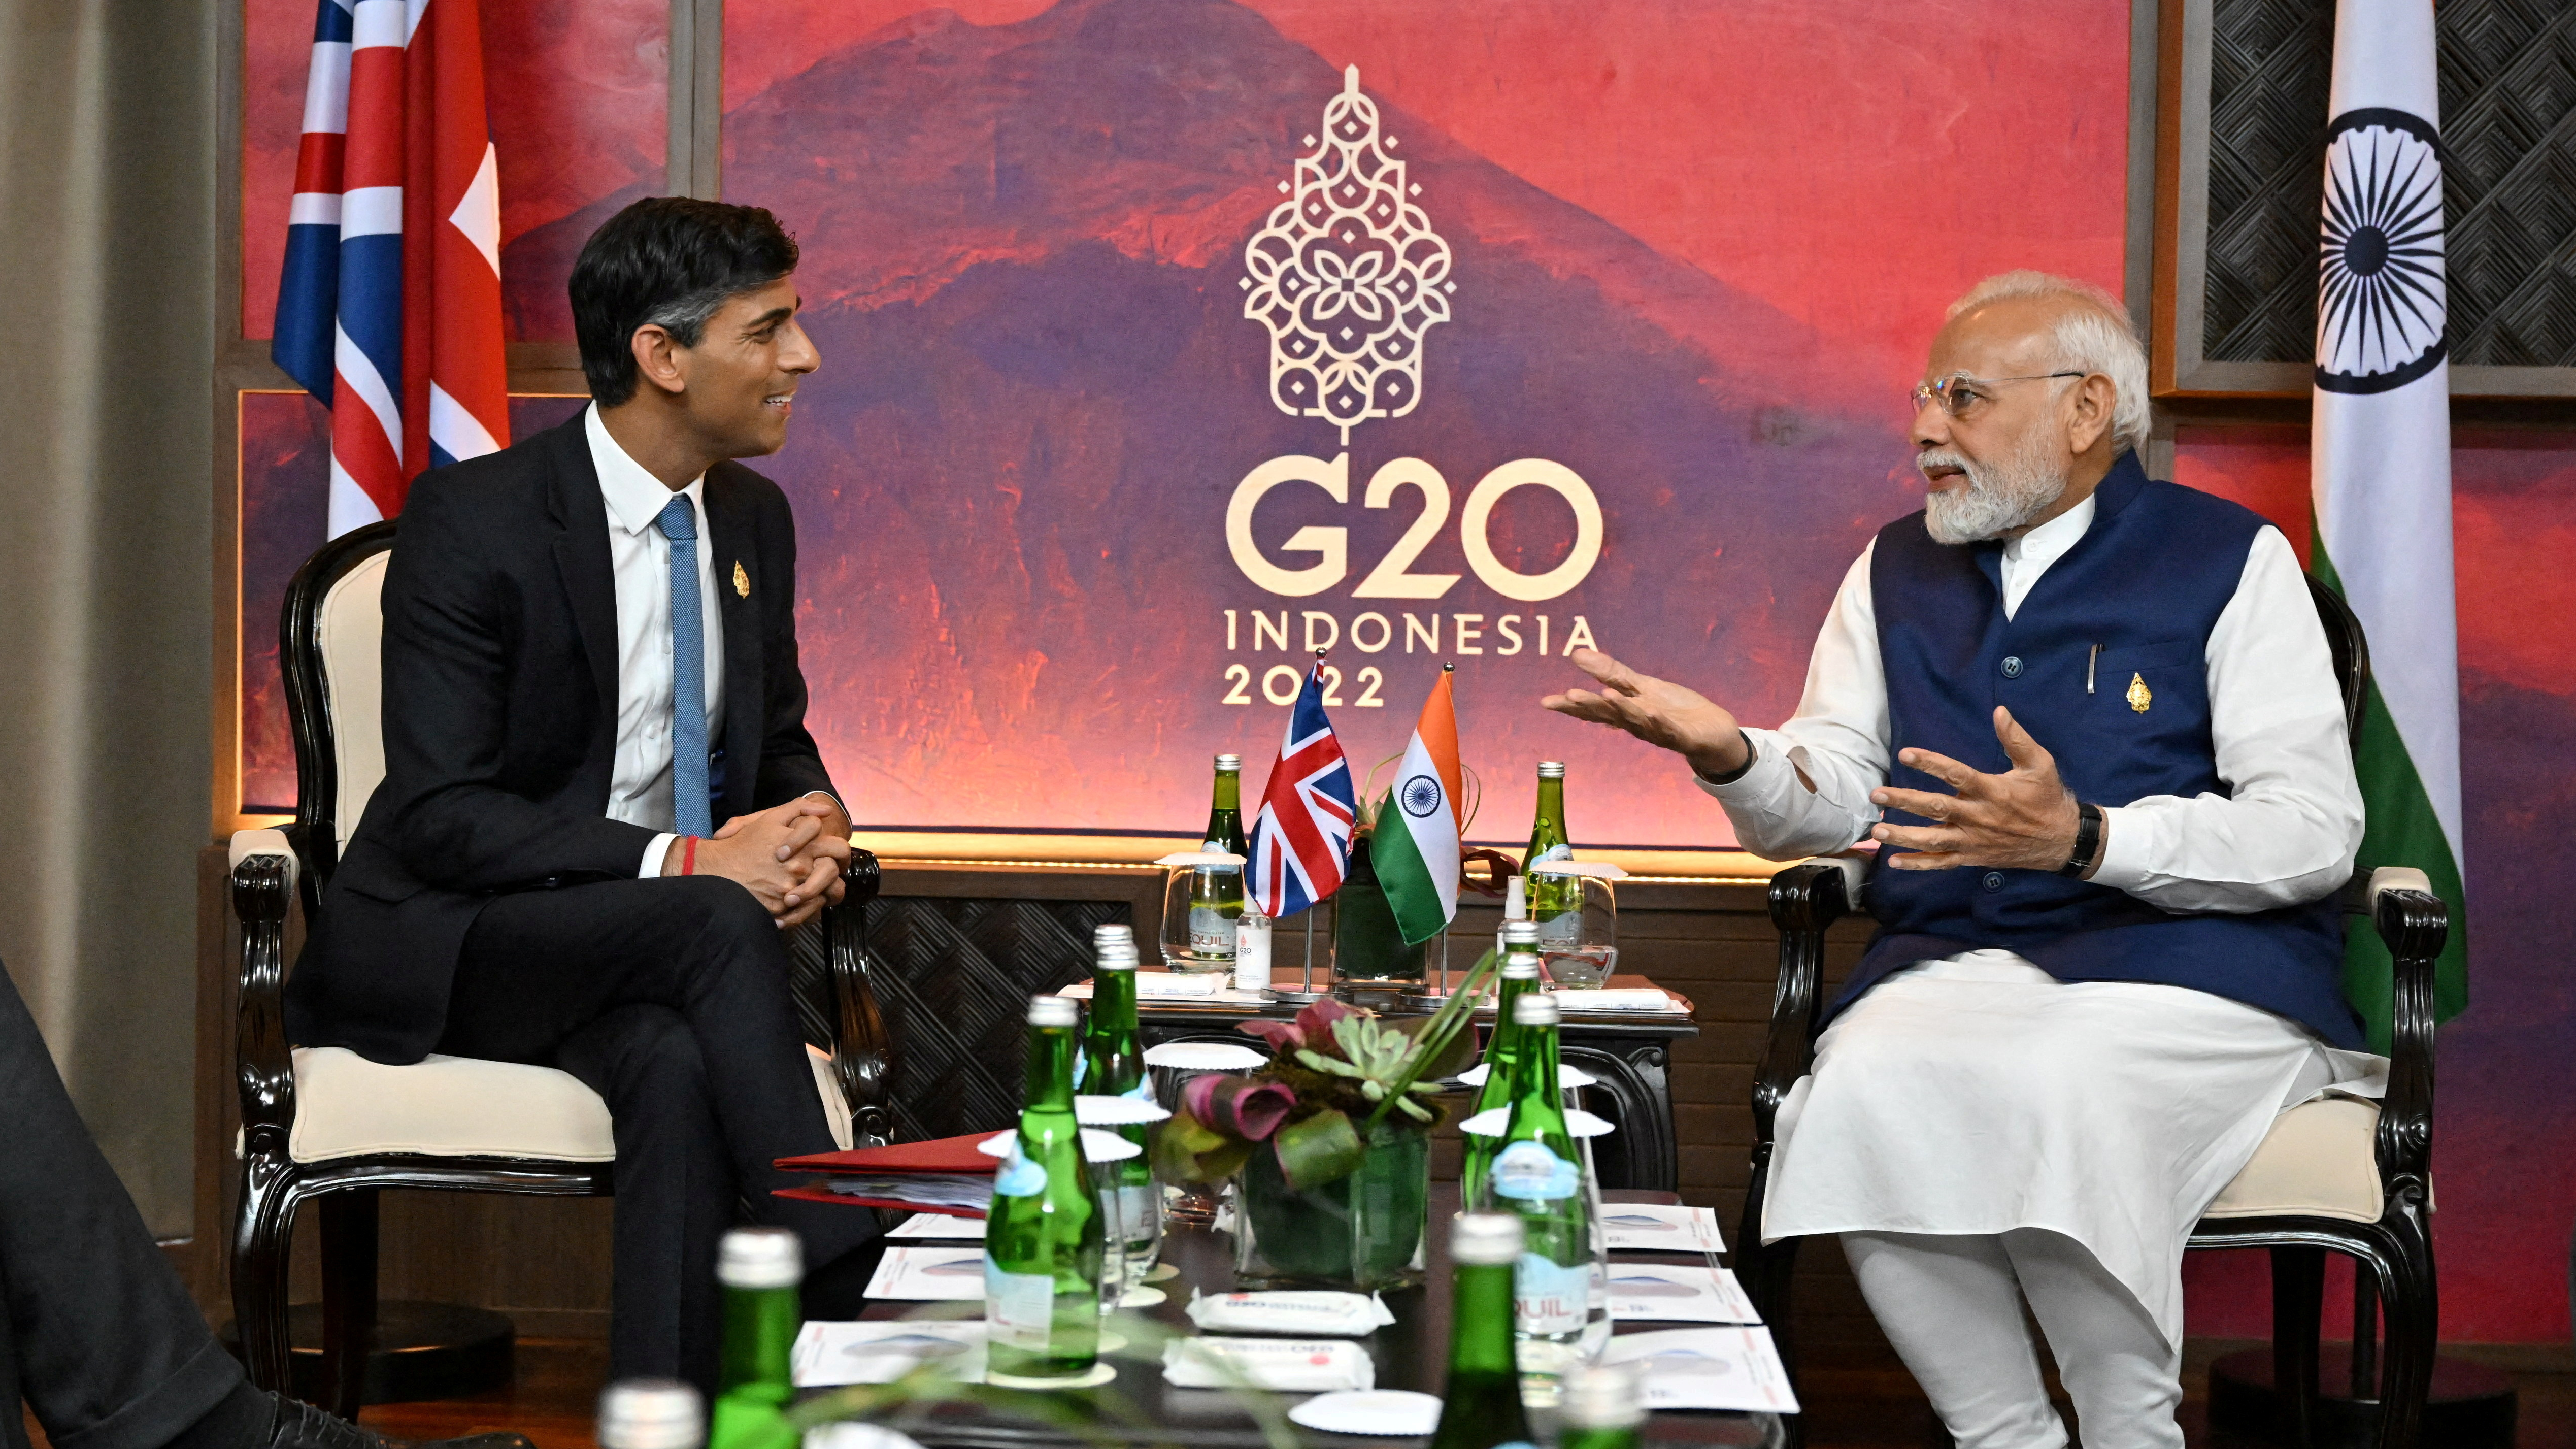 British Prime Minister Rishi Sunak and India's Prime Minister Narendra Modi hold a bilateral meeting at the G20 in Bali. Leon Neal/Pool via Reuters